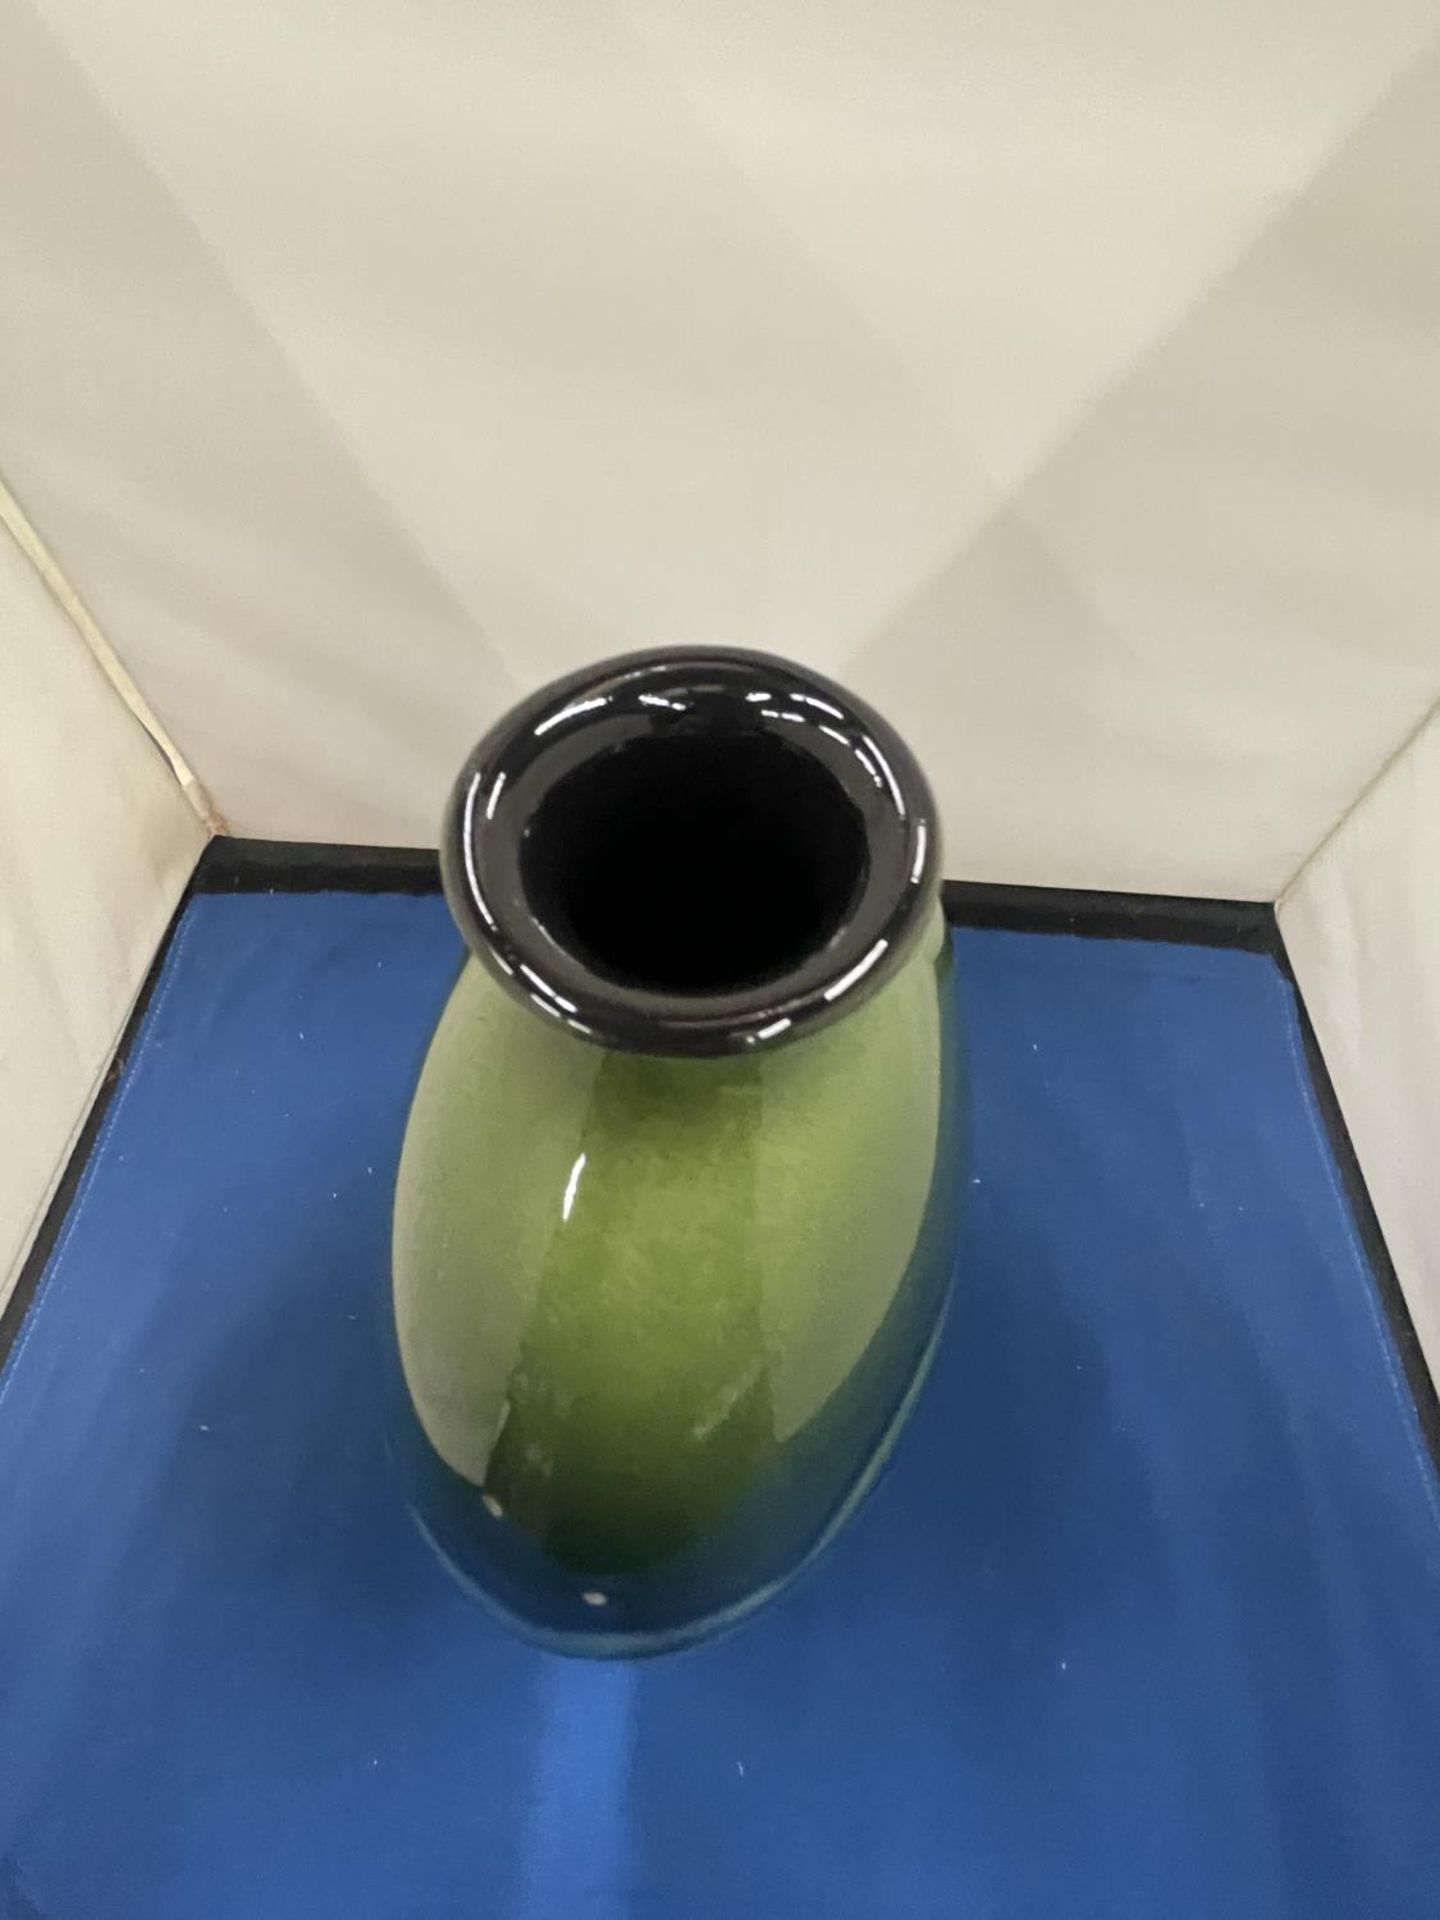 A POOLE POTTERY BOTTLE VASE MAYA DESIGN WITH ORIGINAL BOX 23CM TALL - Image 7 of 12